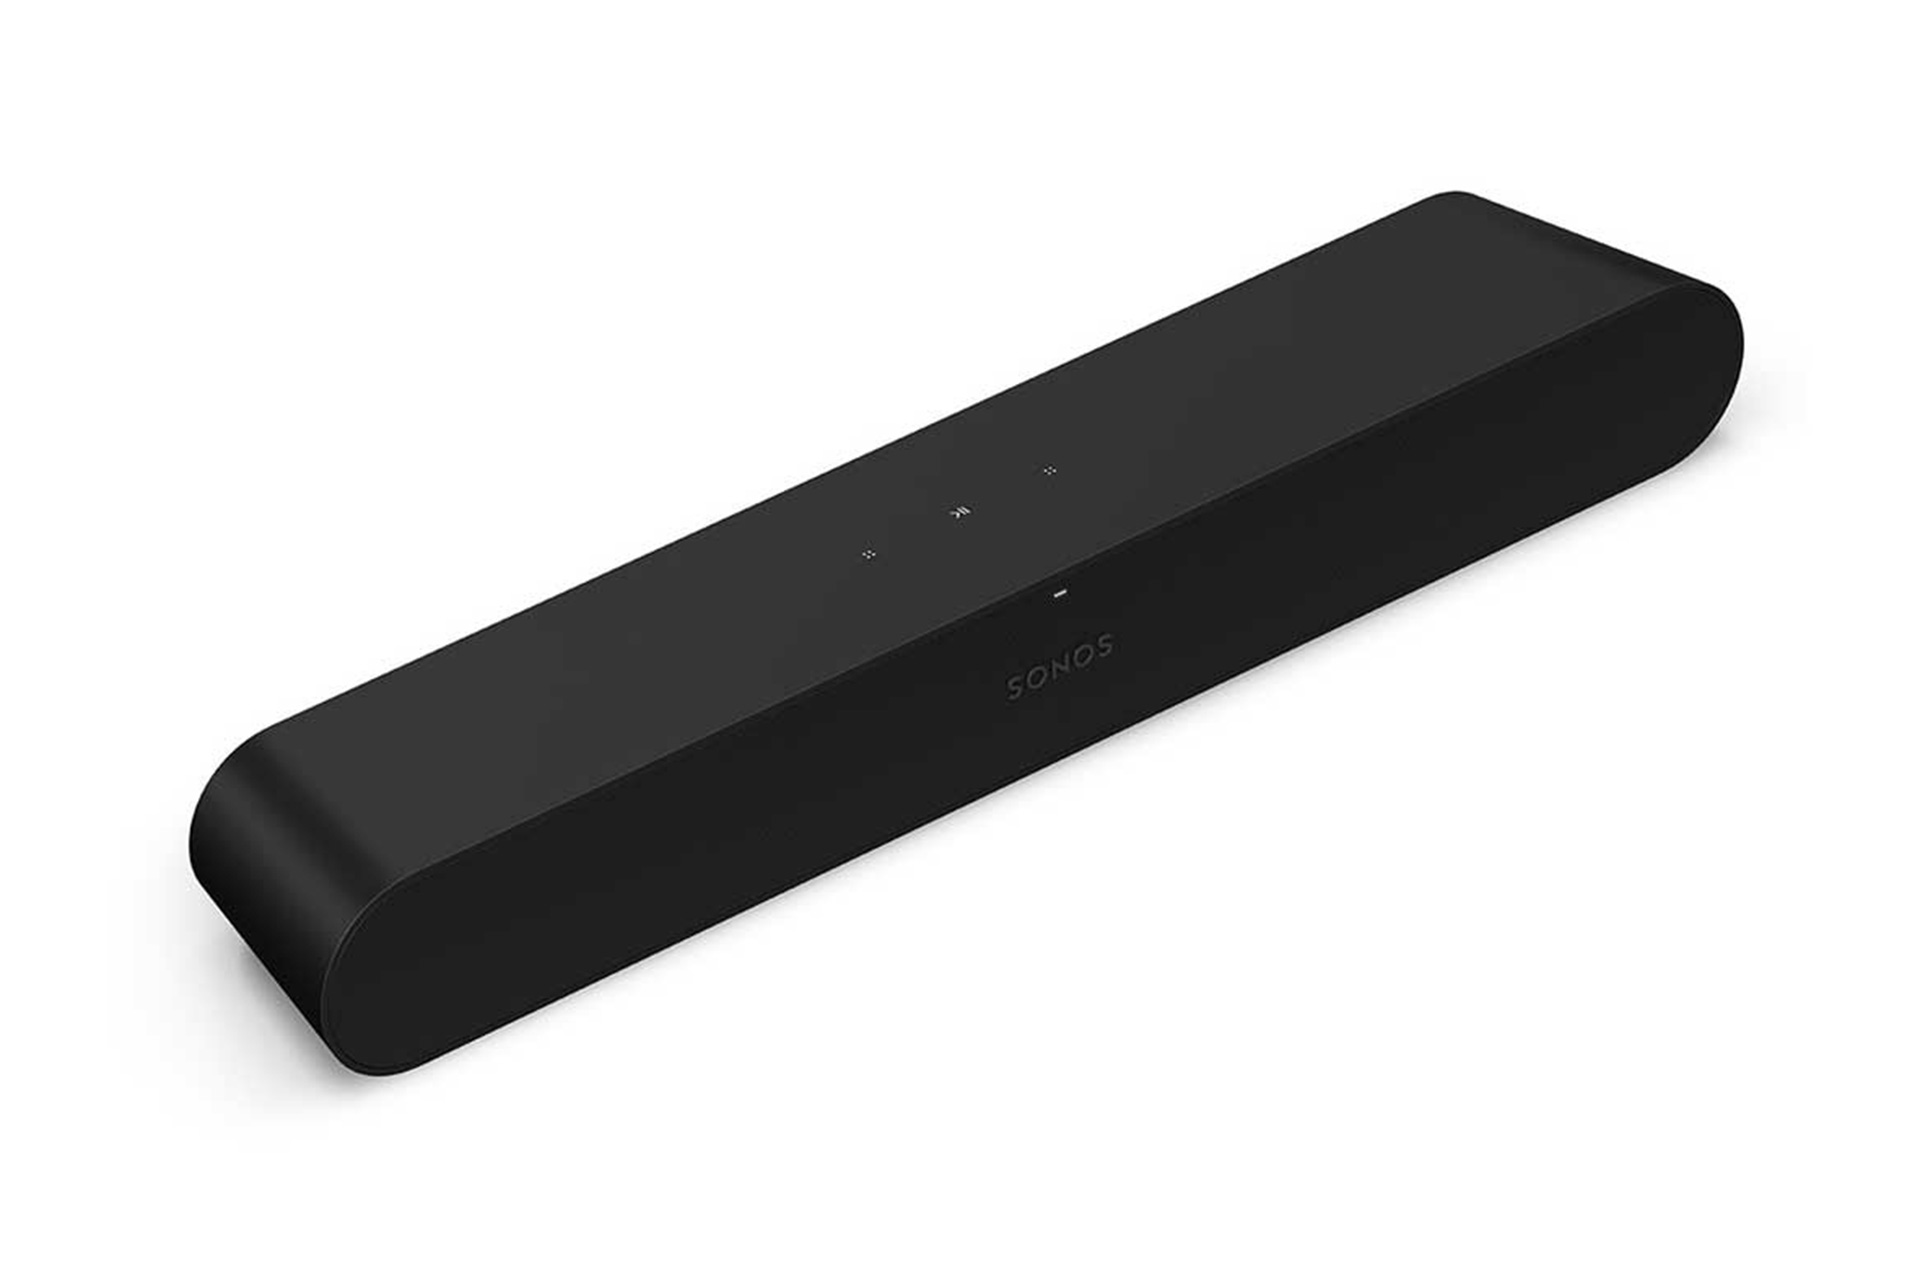 Sonos' rumored $250 soundbar is reportedly called the Ray